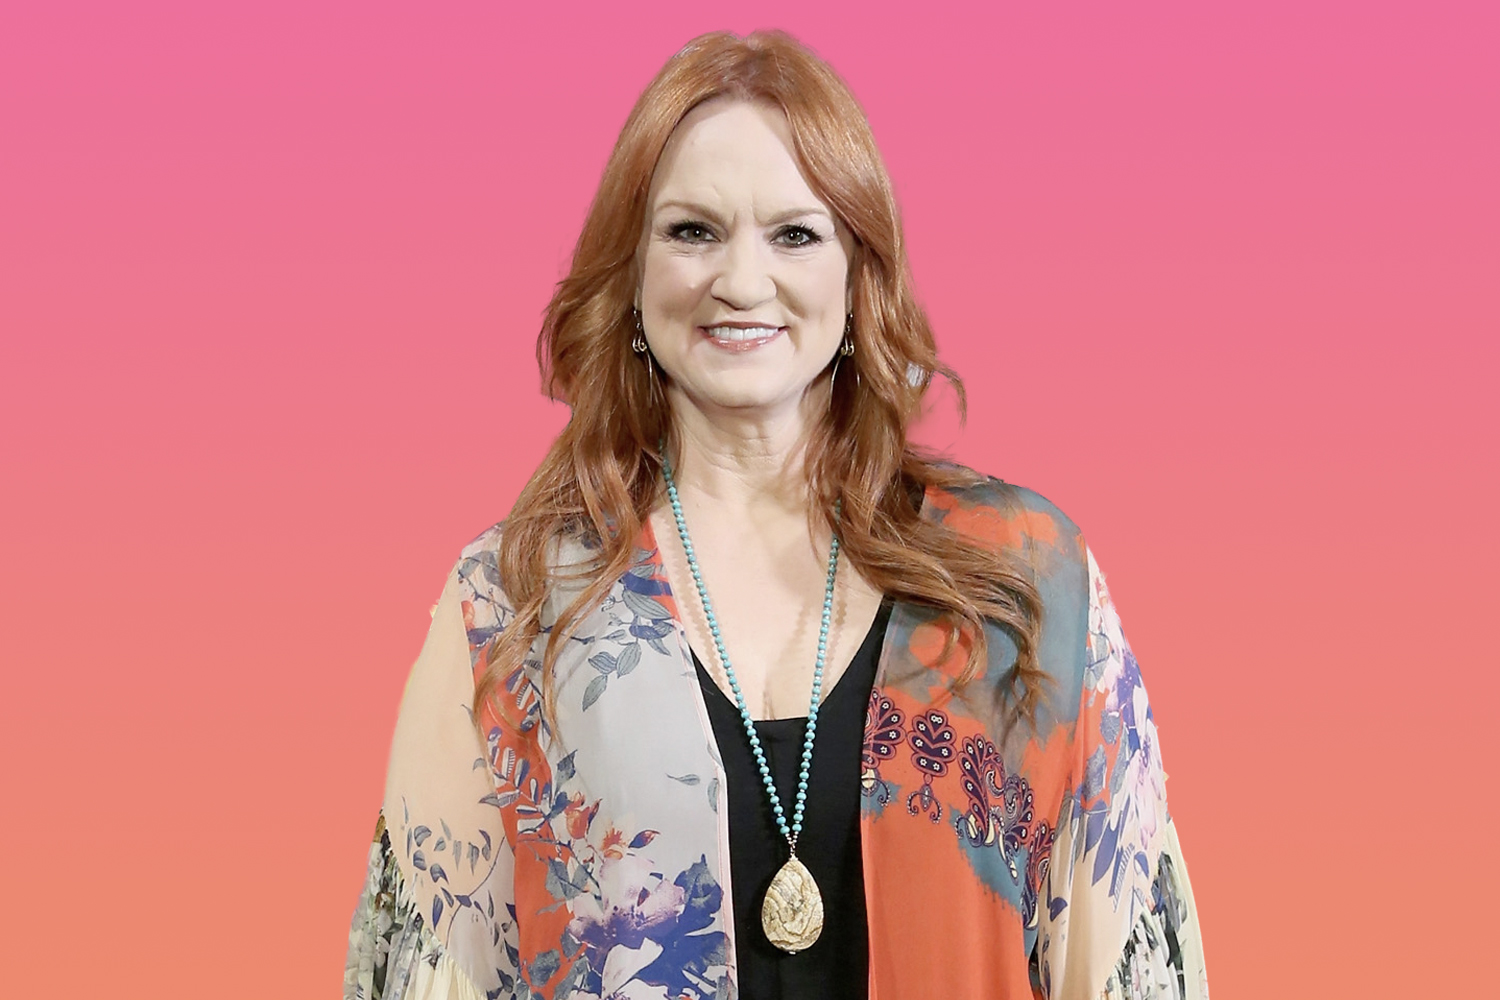 Ree Drummond smiling, wearing a medallion hanging from a turquiose necklace, and a sheer top with a black undershirt